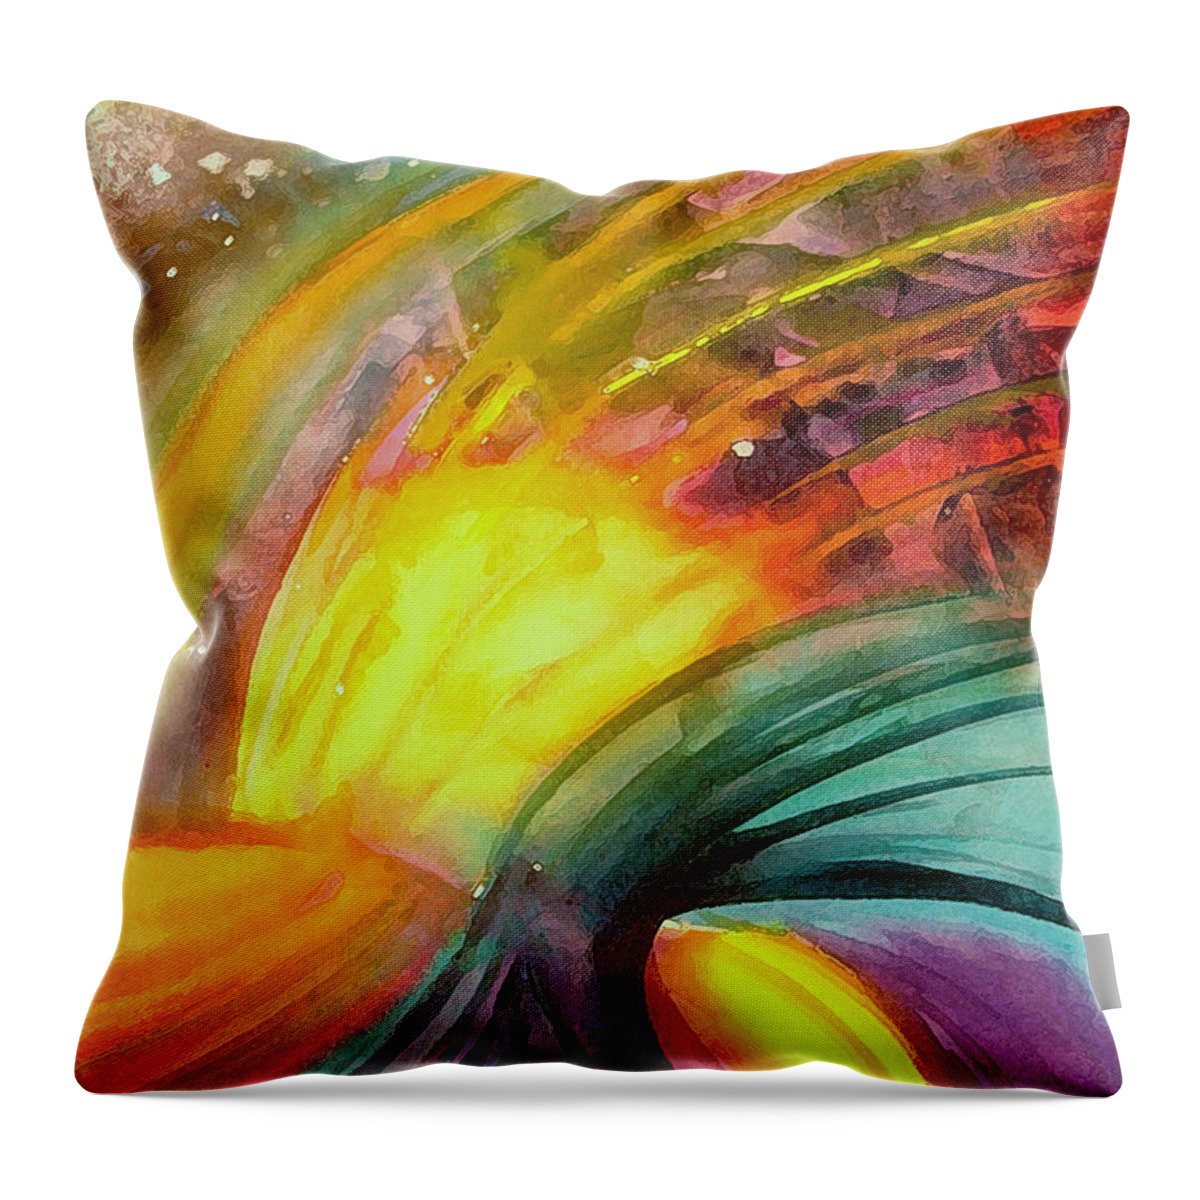 Experssion Throw Pillow featuring the painting Study in Color by Allison Ashton